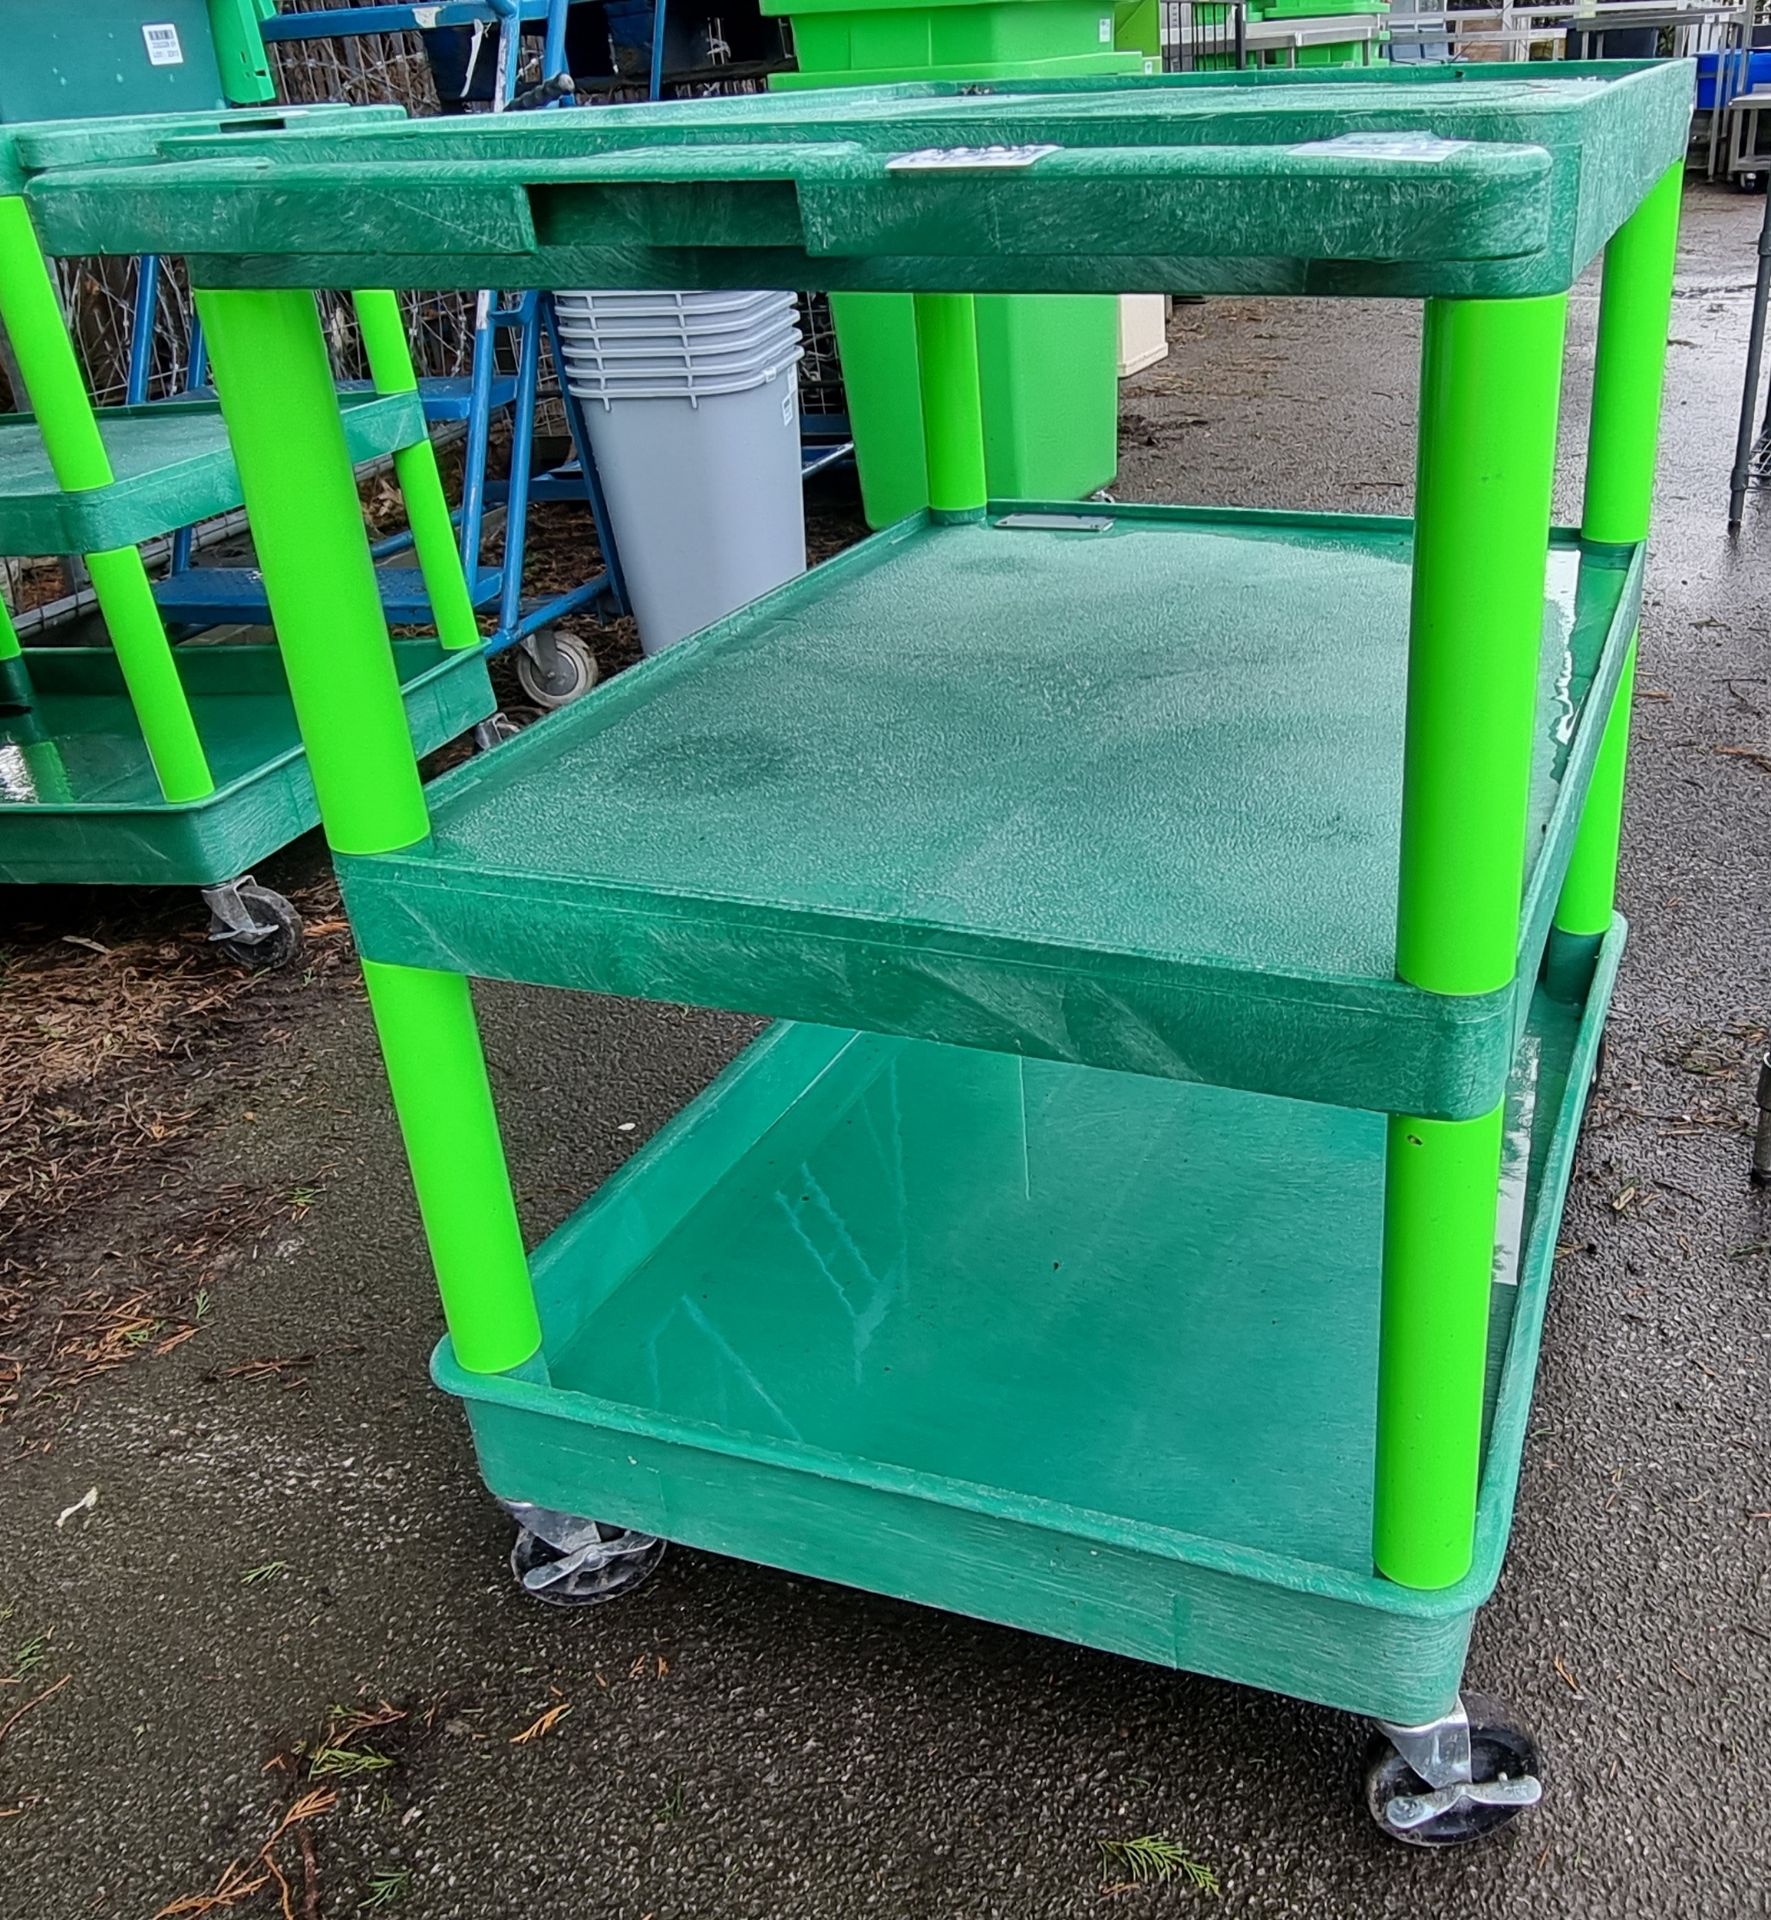 Luxor 3 tier green plastic trolley - dimensions 88 x 61 x 85cm - Image 2 of 2